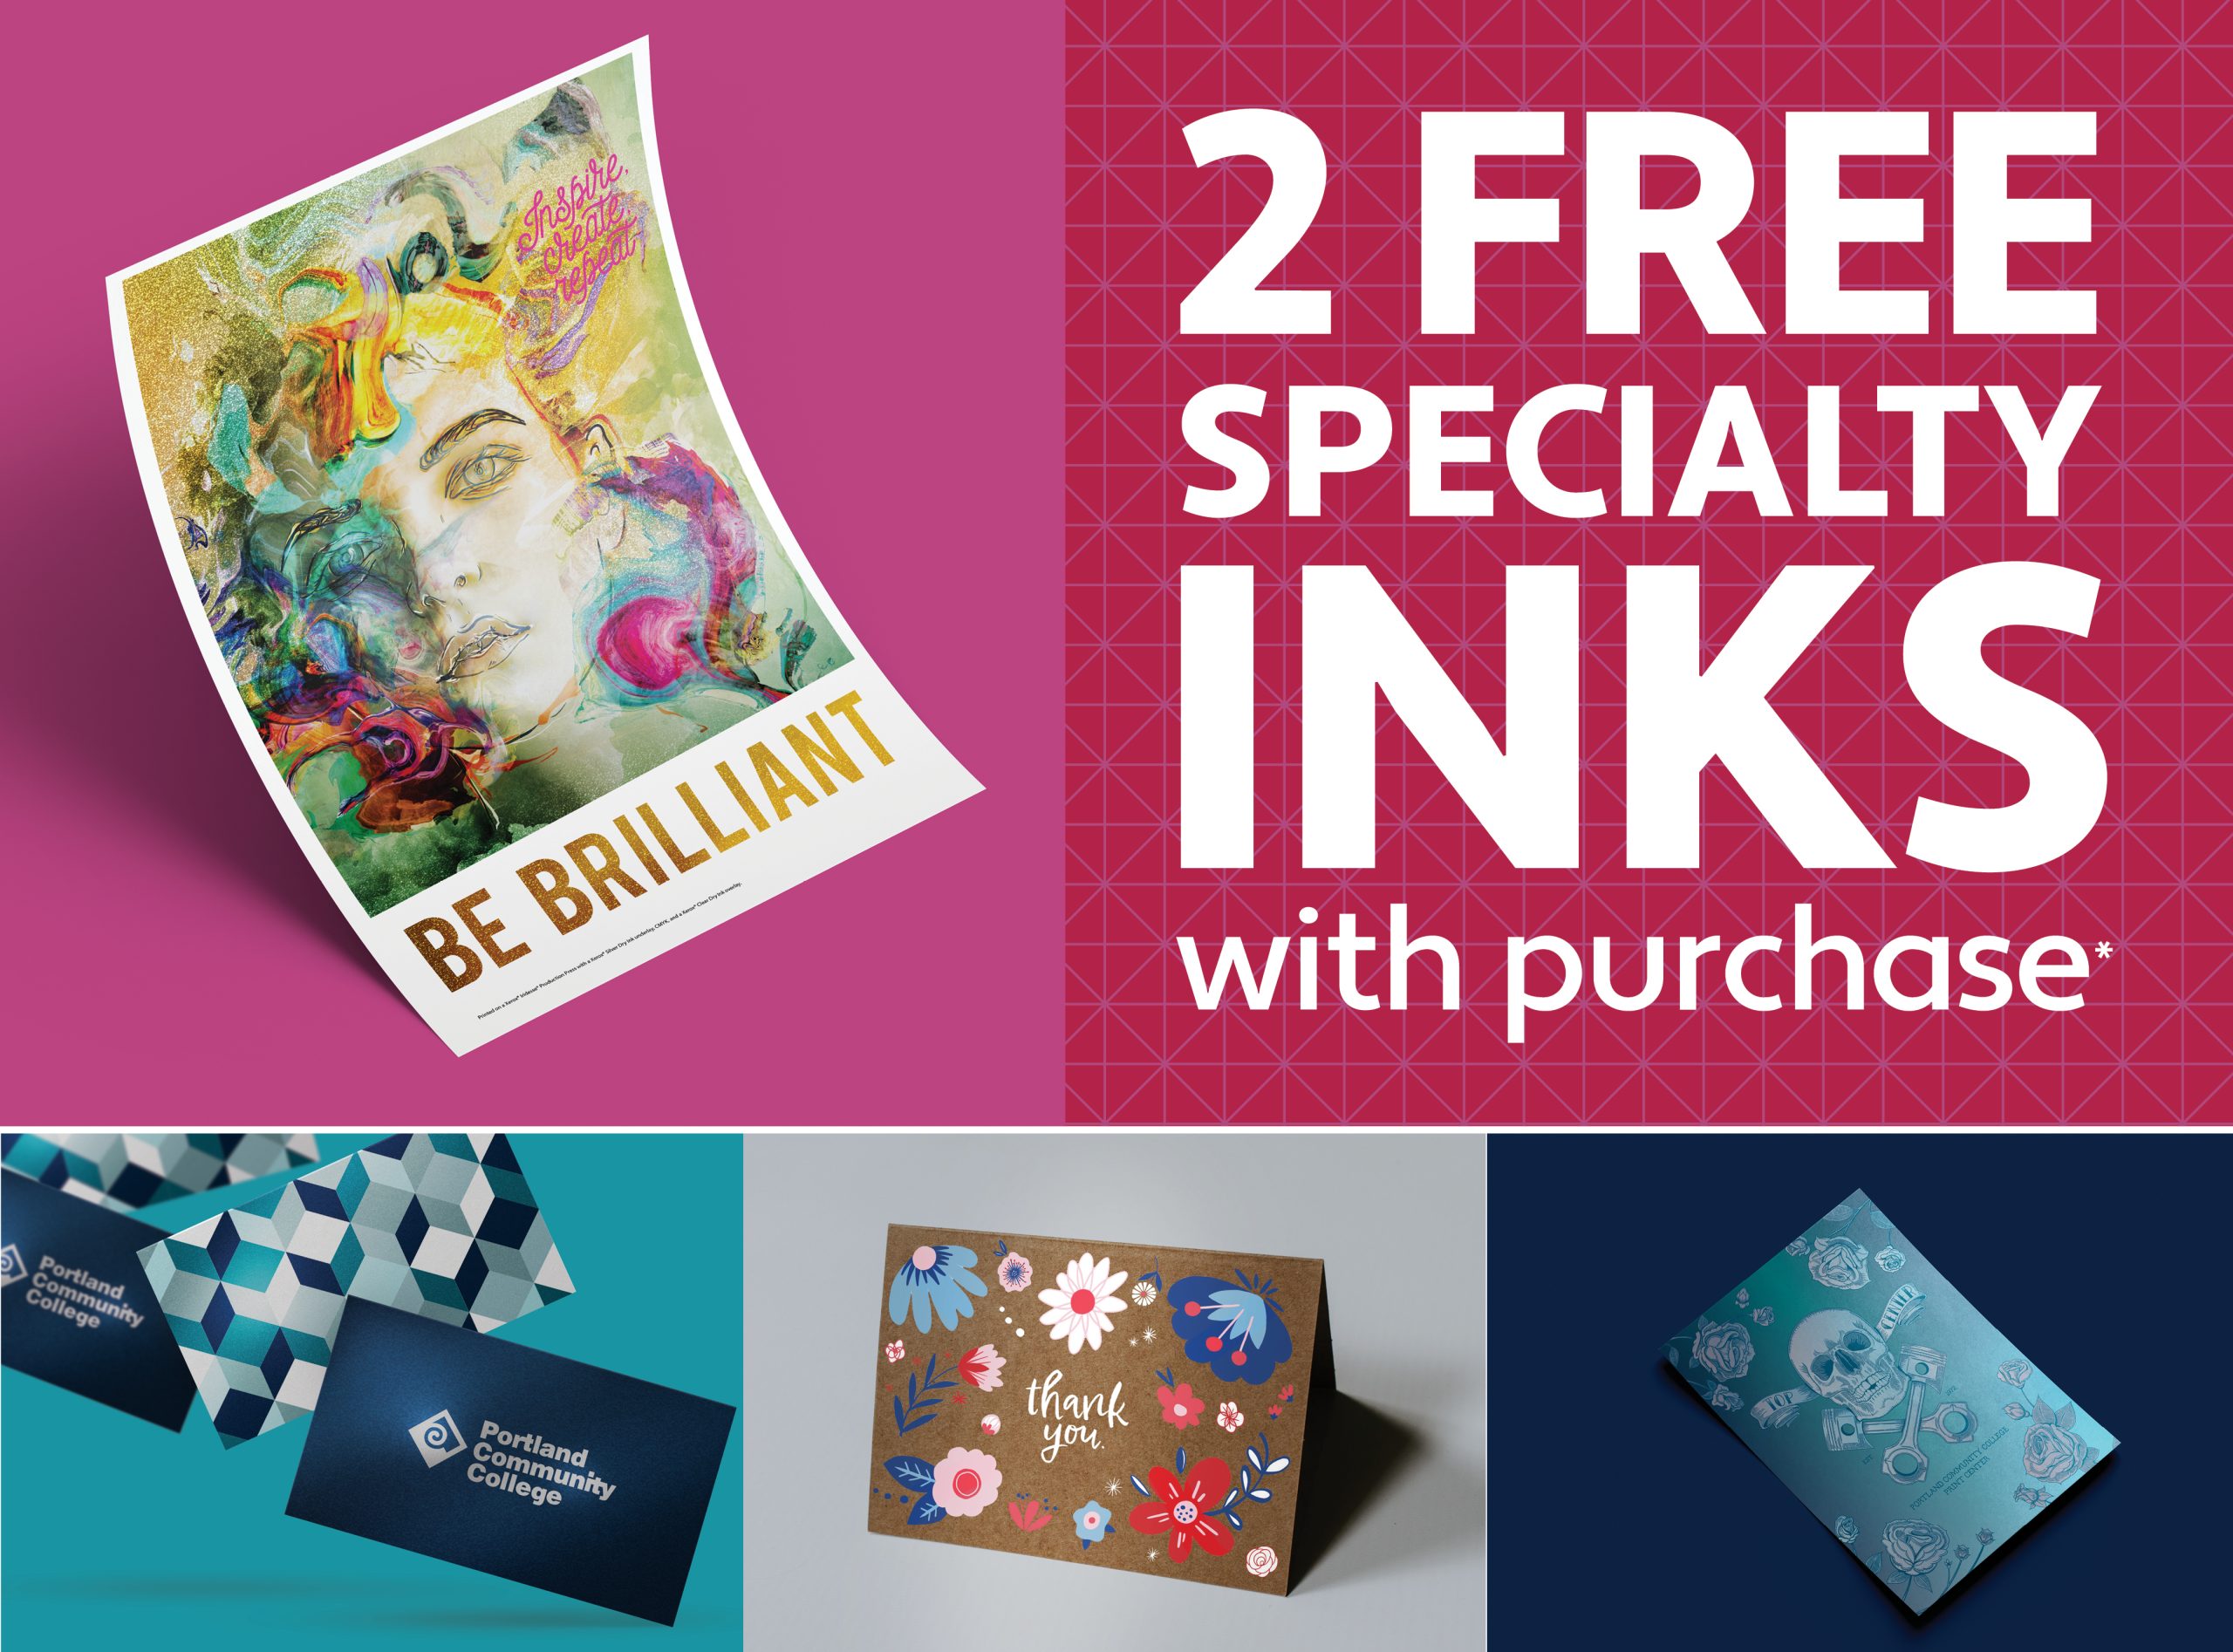 2 free specialty inks with purchase